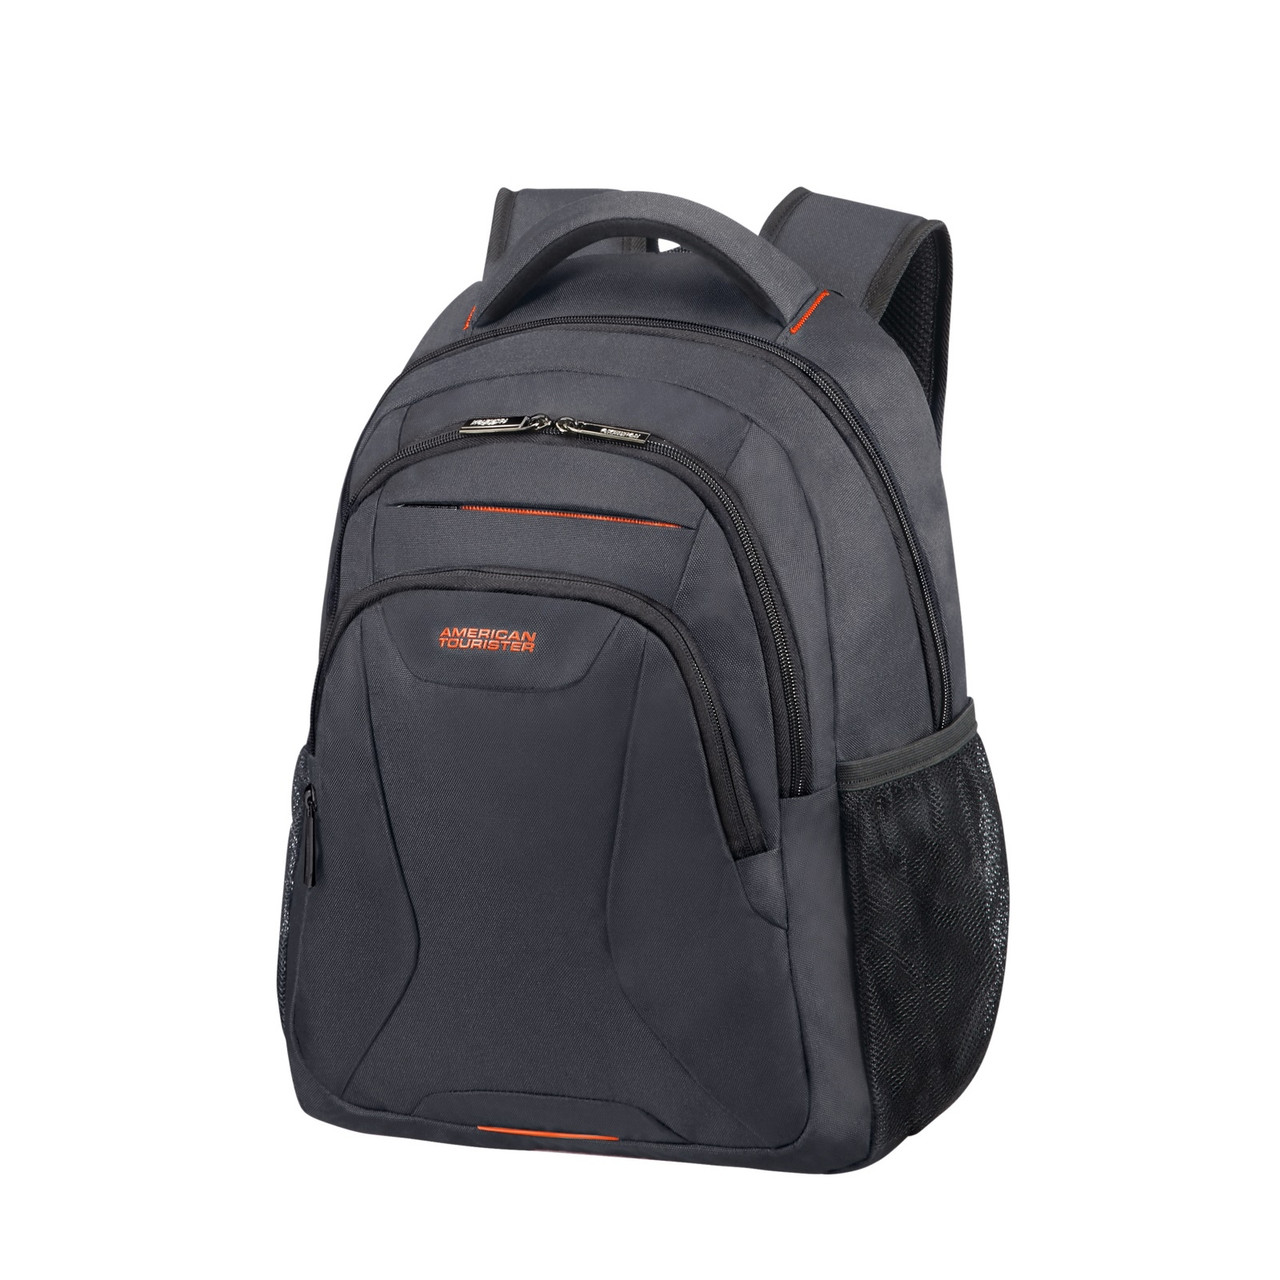 Wholesale Prevo 15.6 Inch Laptop Bag, Cushioned Lining, With Shoulder  Strap, Black | twhouse.co.uk